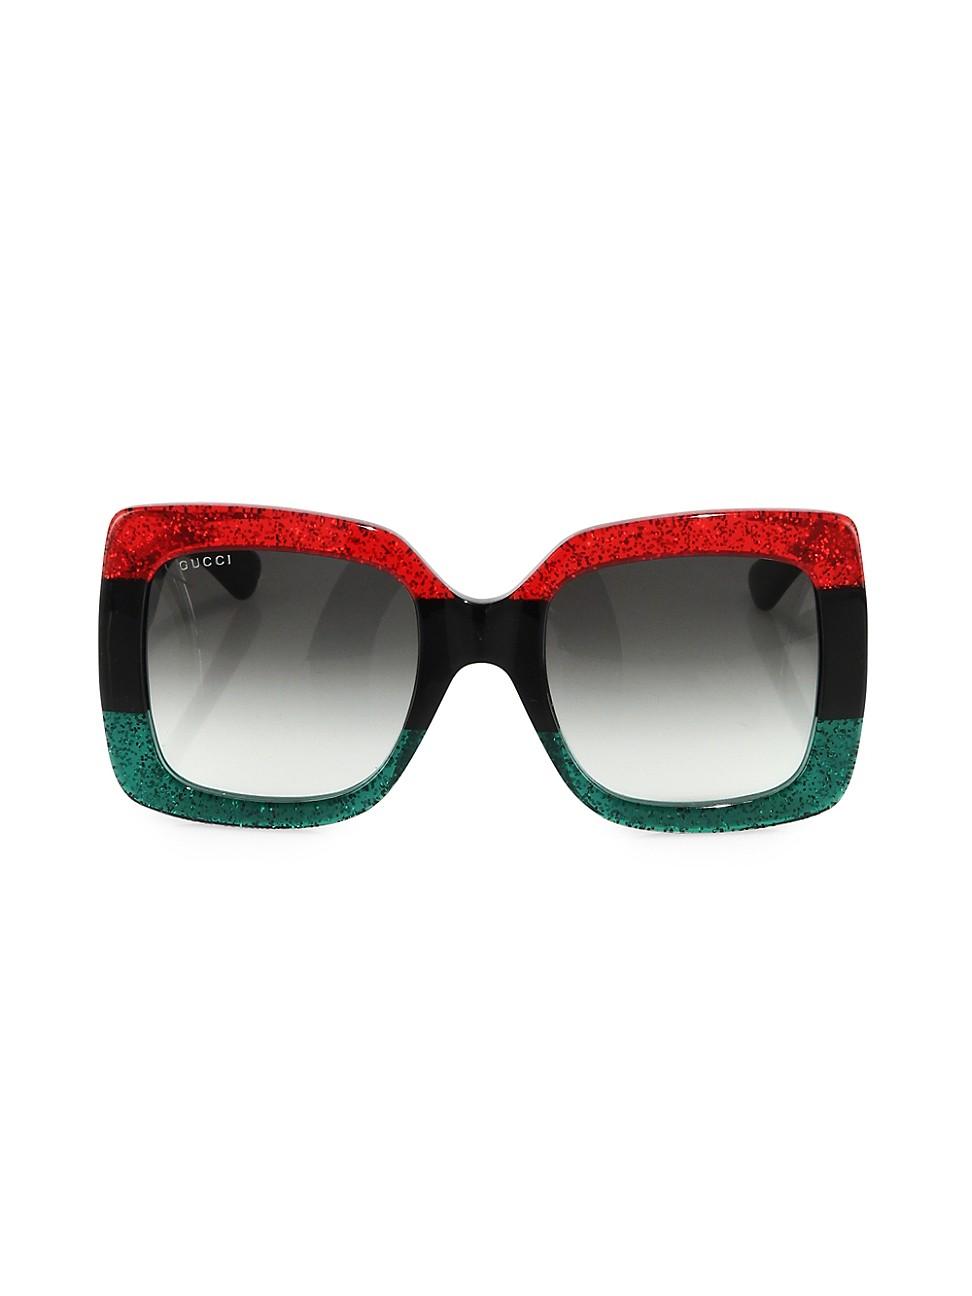 gucci sunglasses green and red